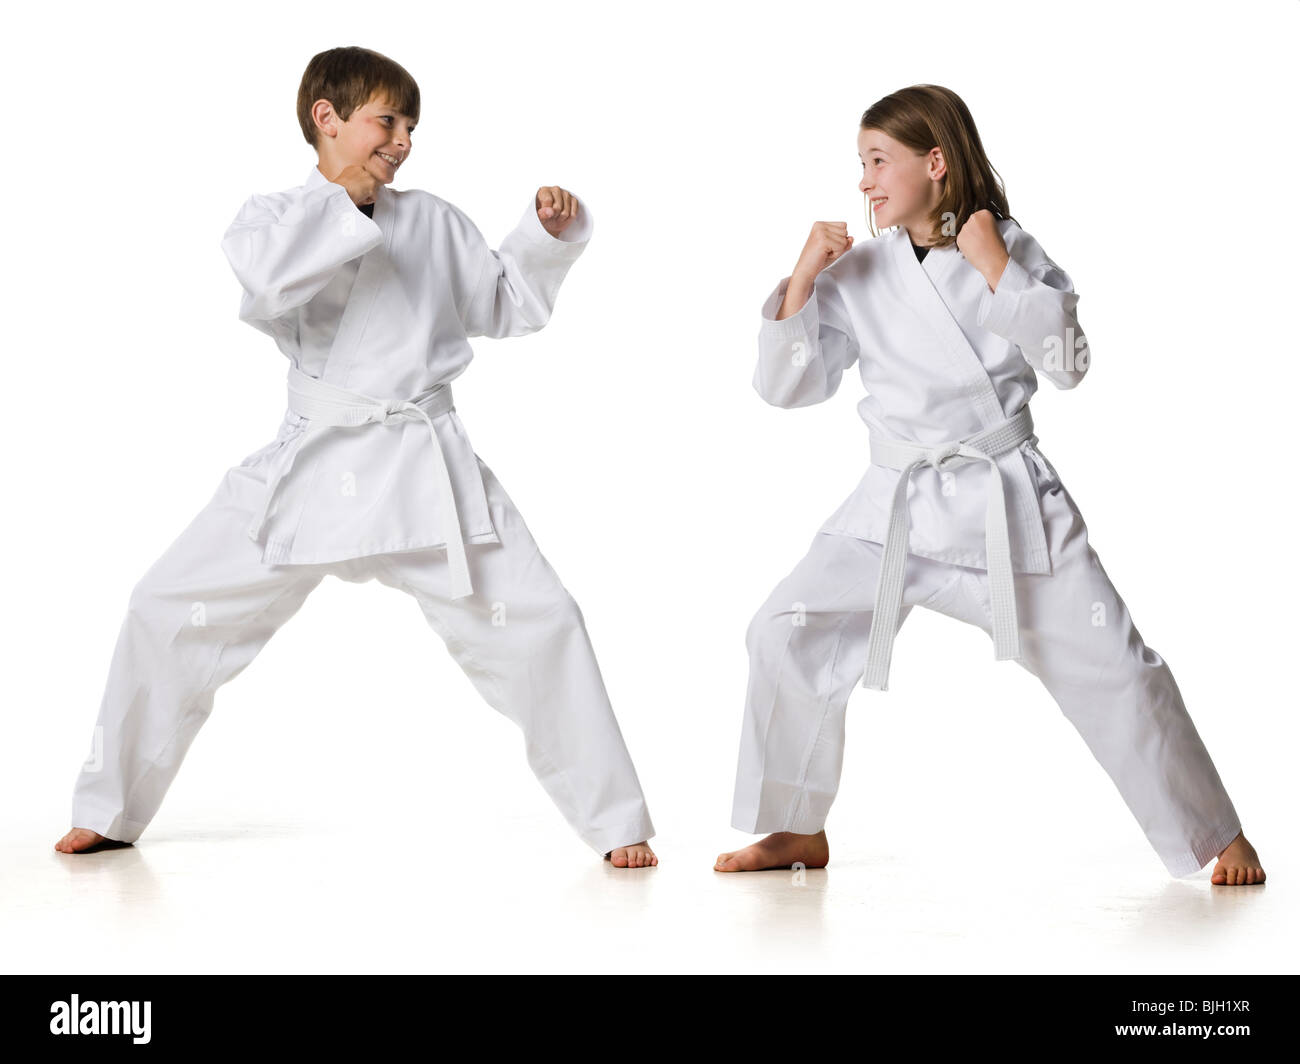 youth practicing martial arts Stock Photo